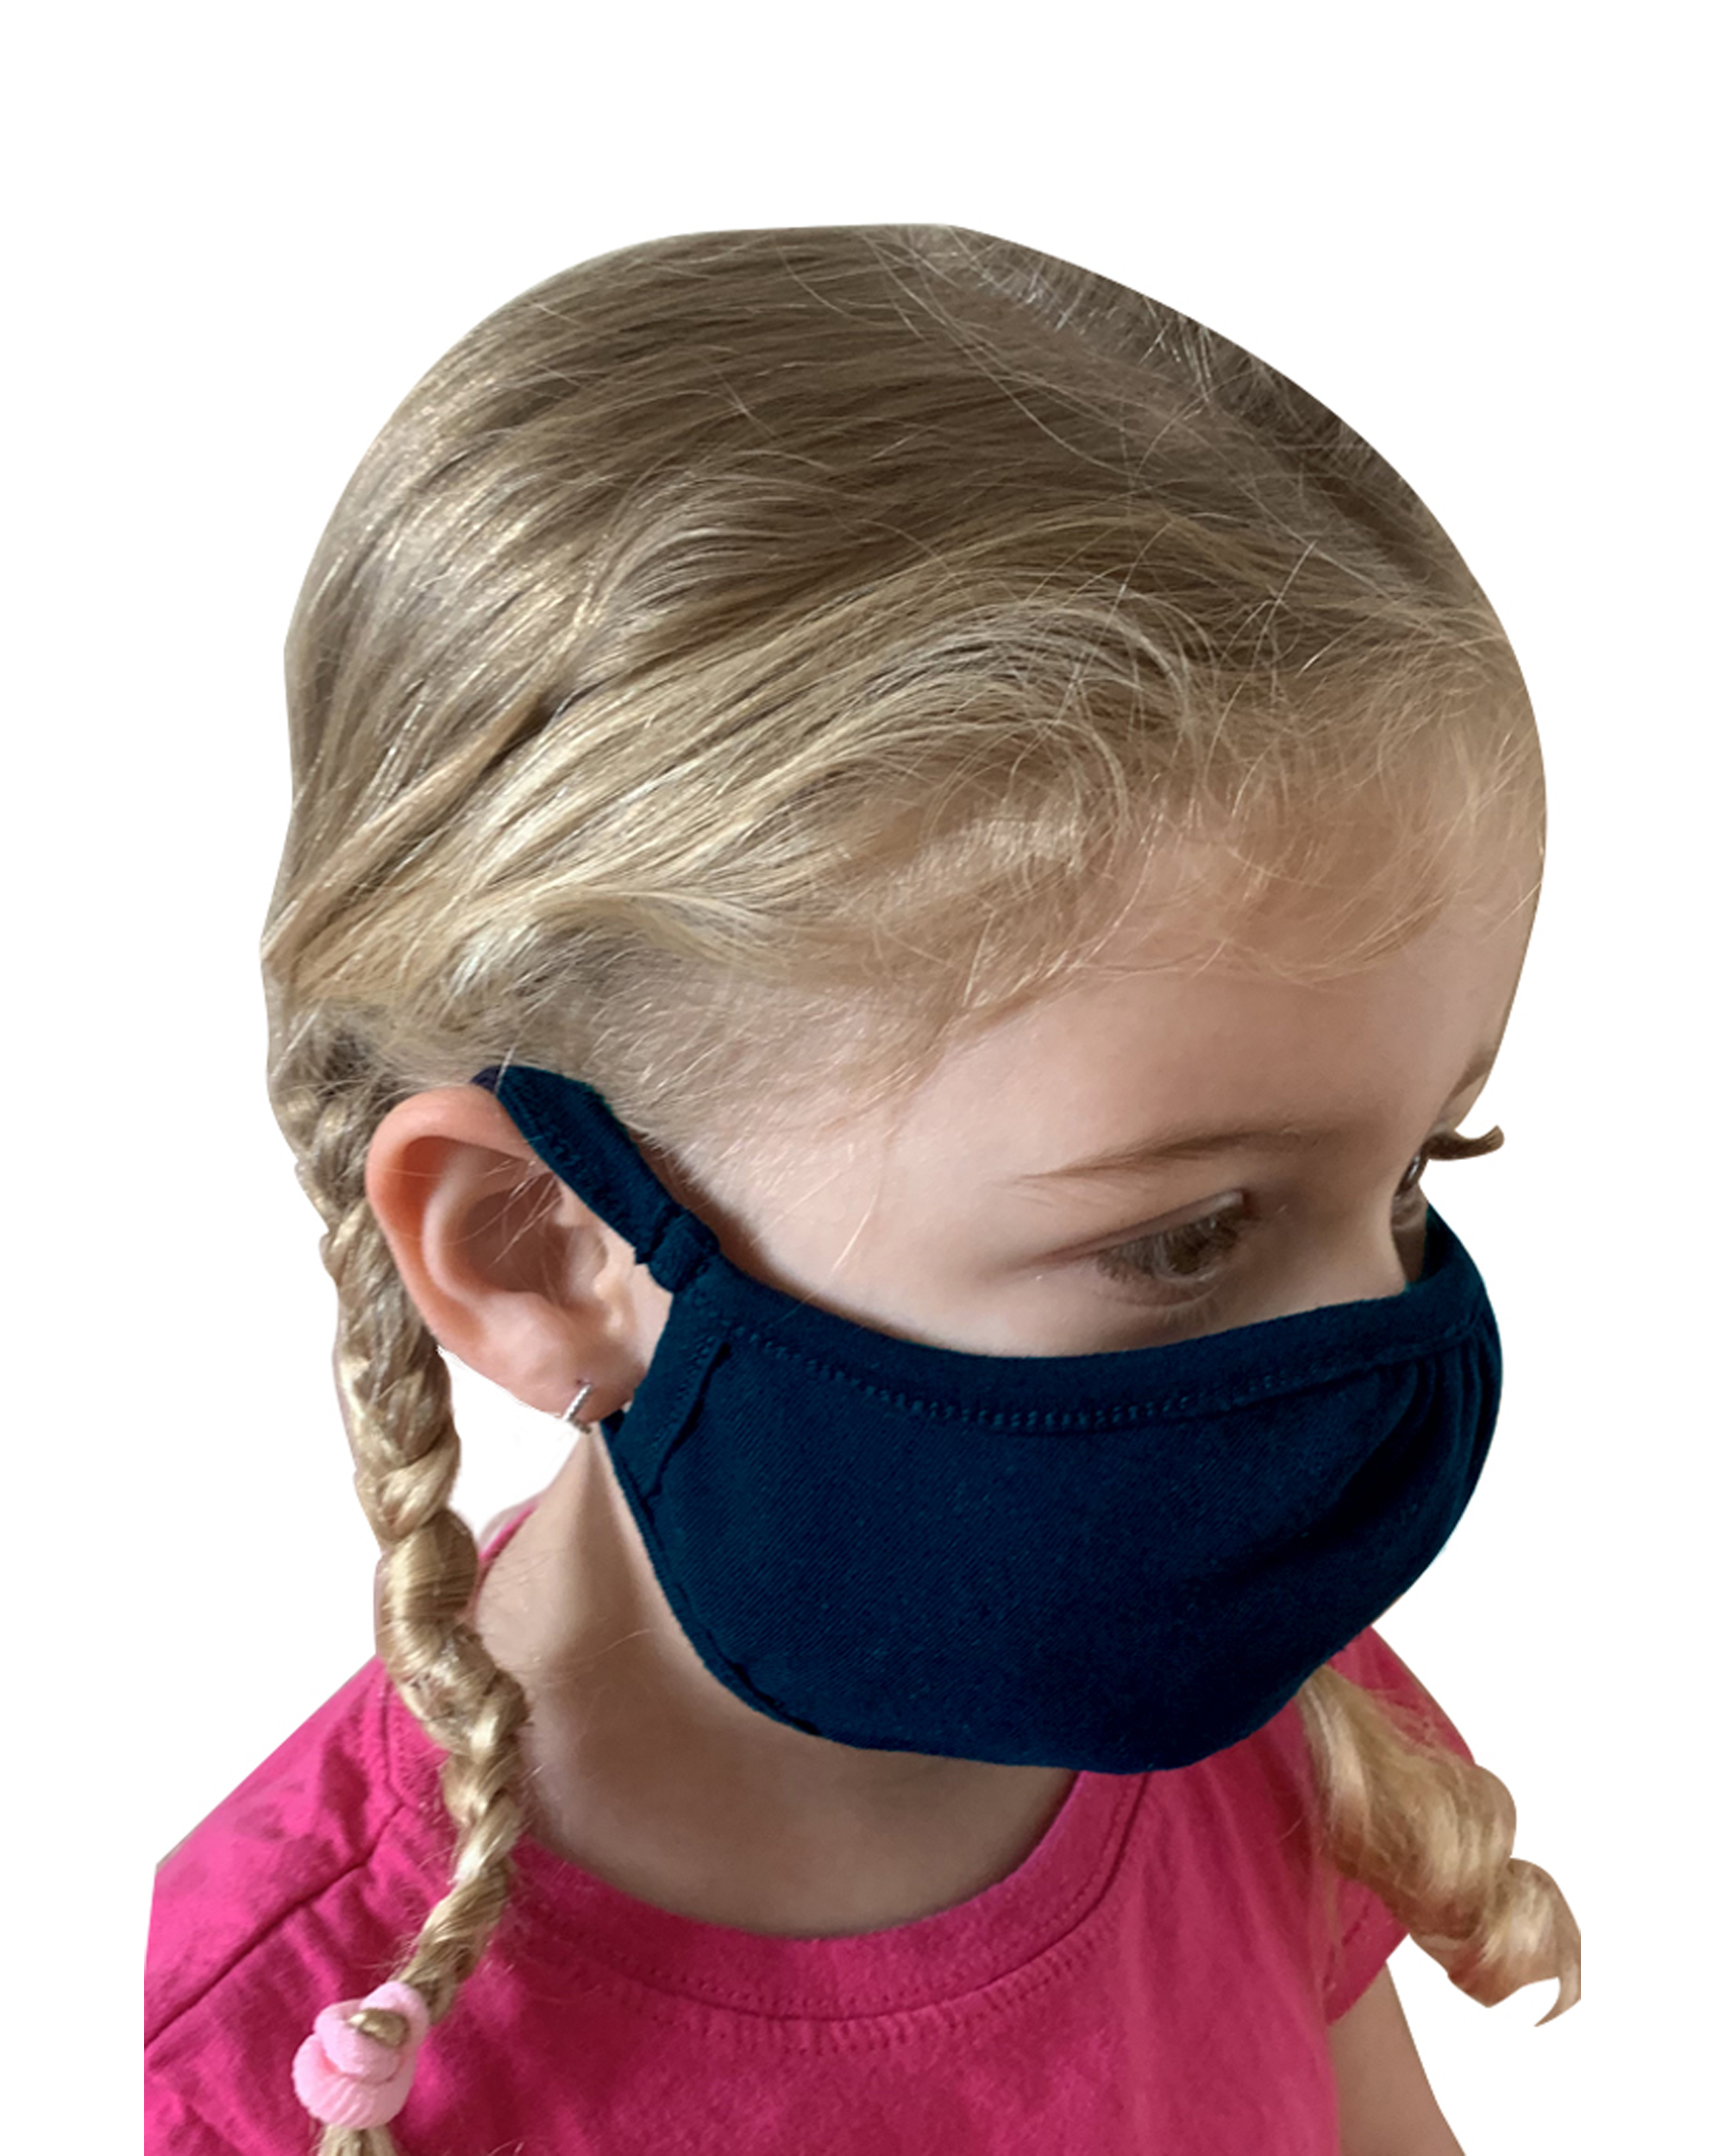 Next Level Apparel® M101 Youth ECO Face Mask - 48 pack